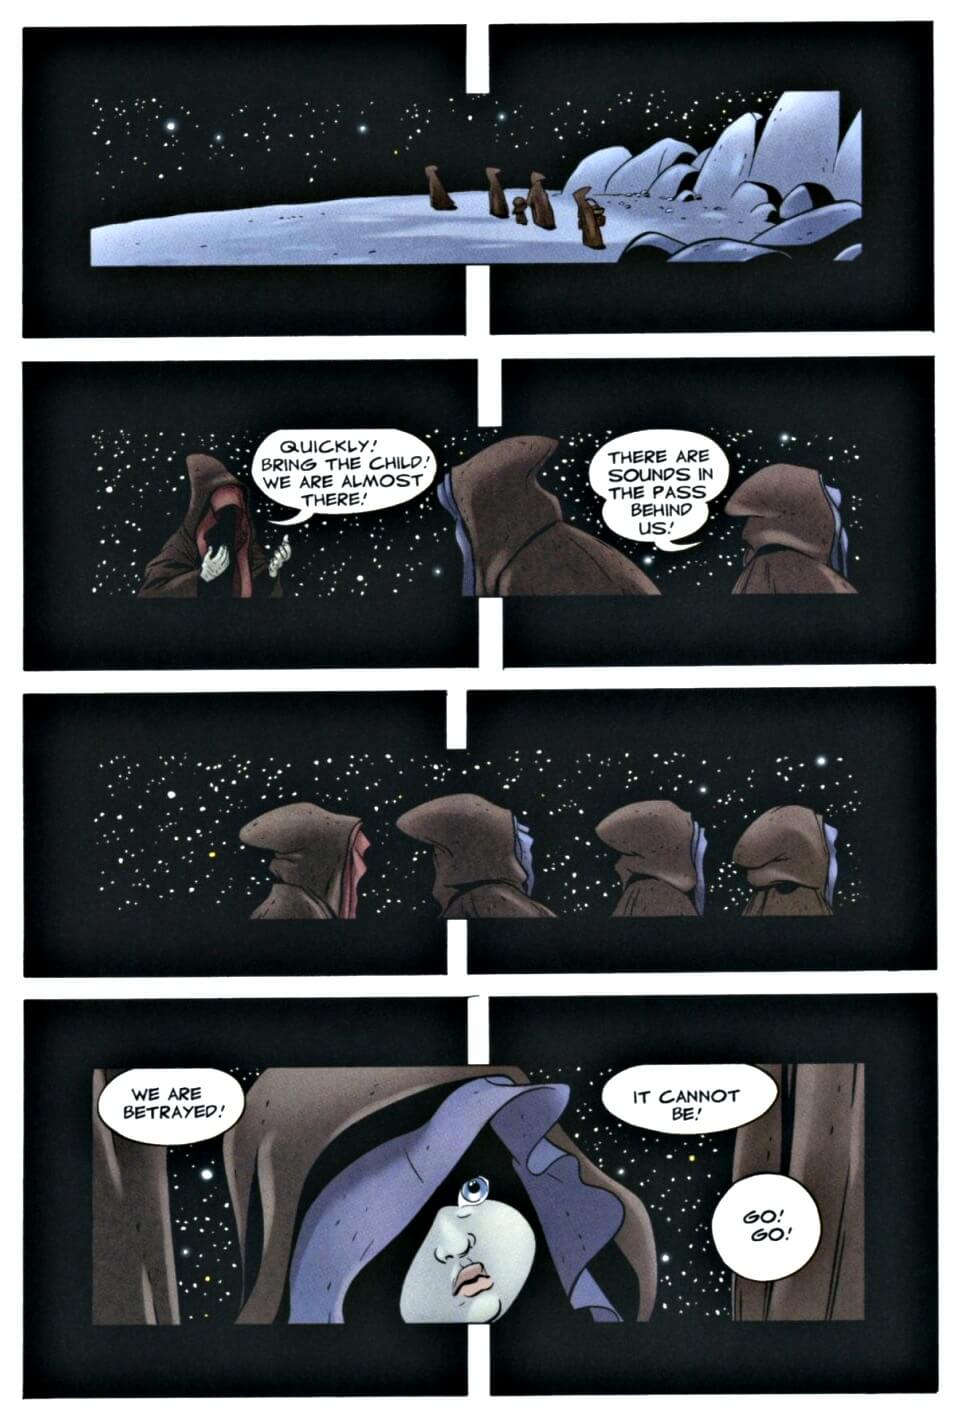 page 6 chapter 1 of bone 9 crown of horns graphic novel